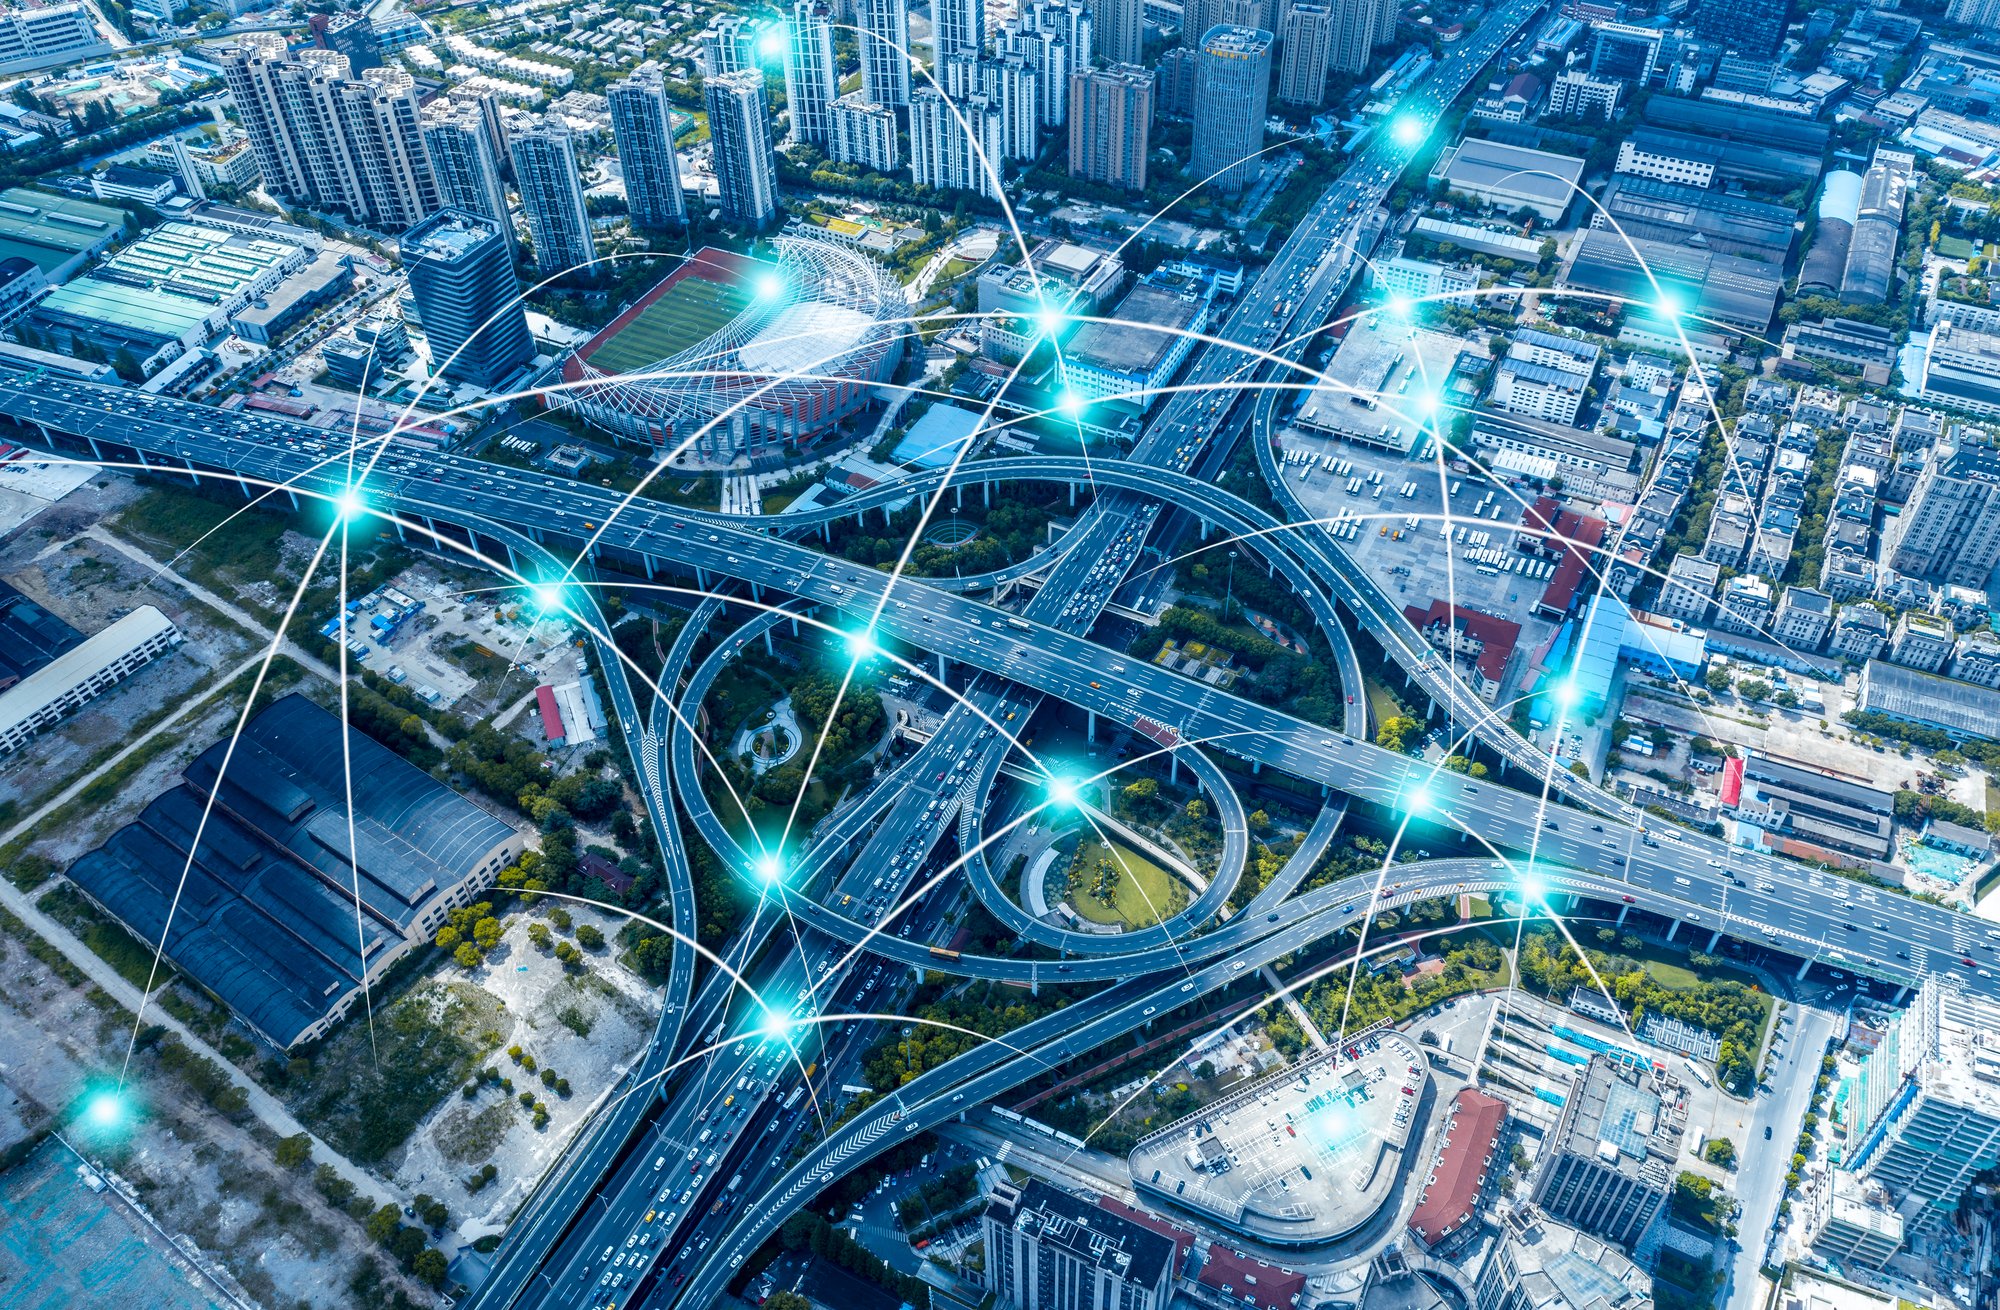 Aerial view of a complex urban highway system overlaid with glowing blue digital networks, symbolizing Cox 2M's IoT solutions that enhance business connectivity and efficiency across.